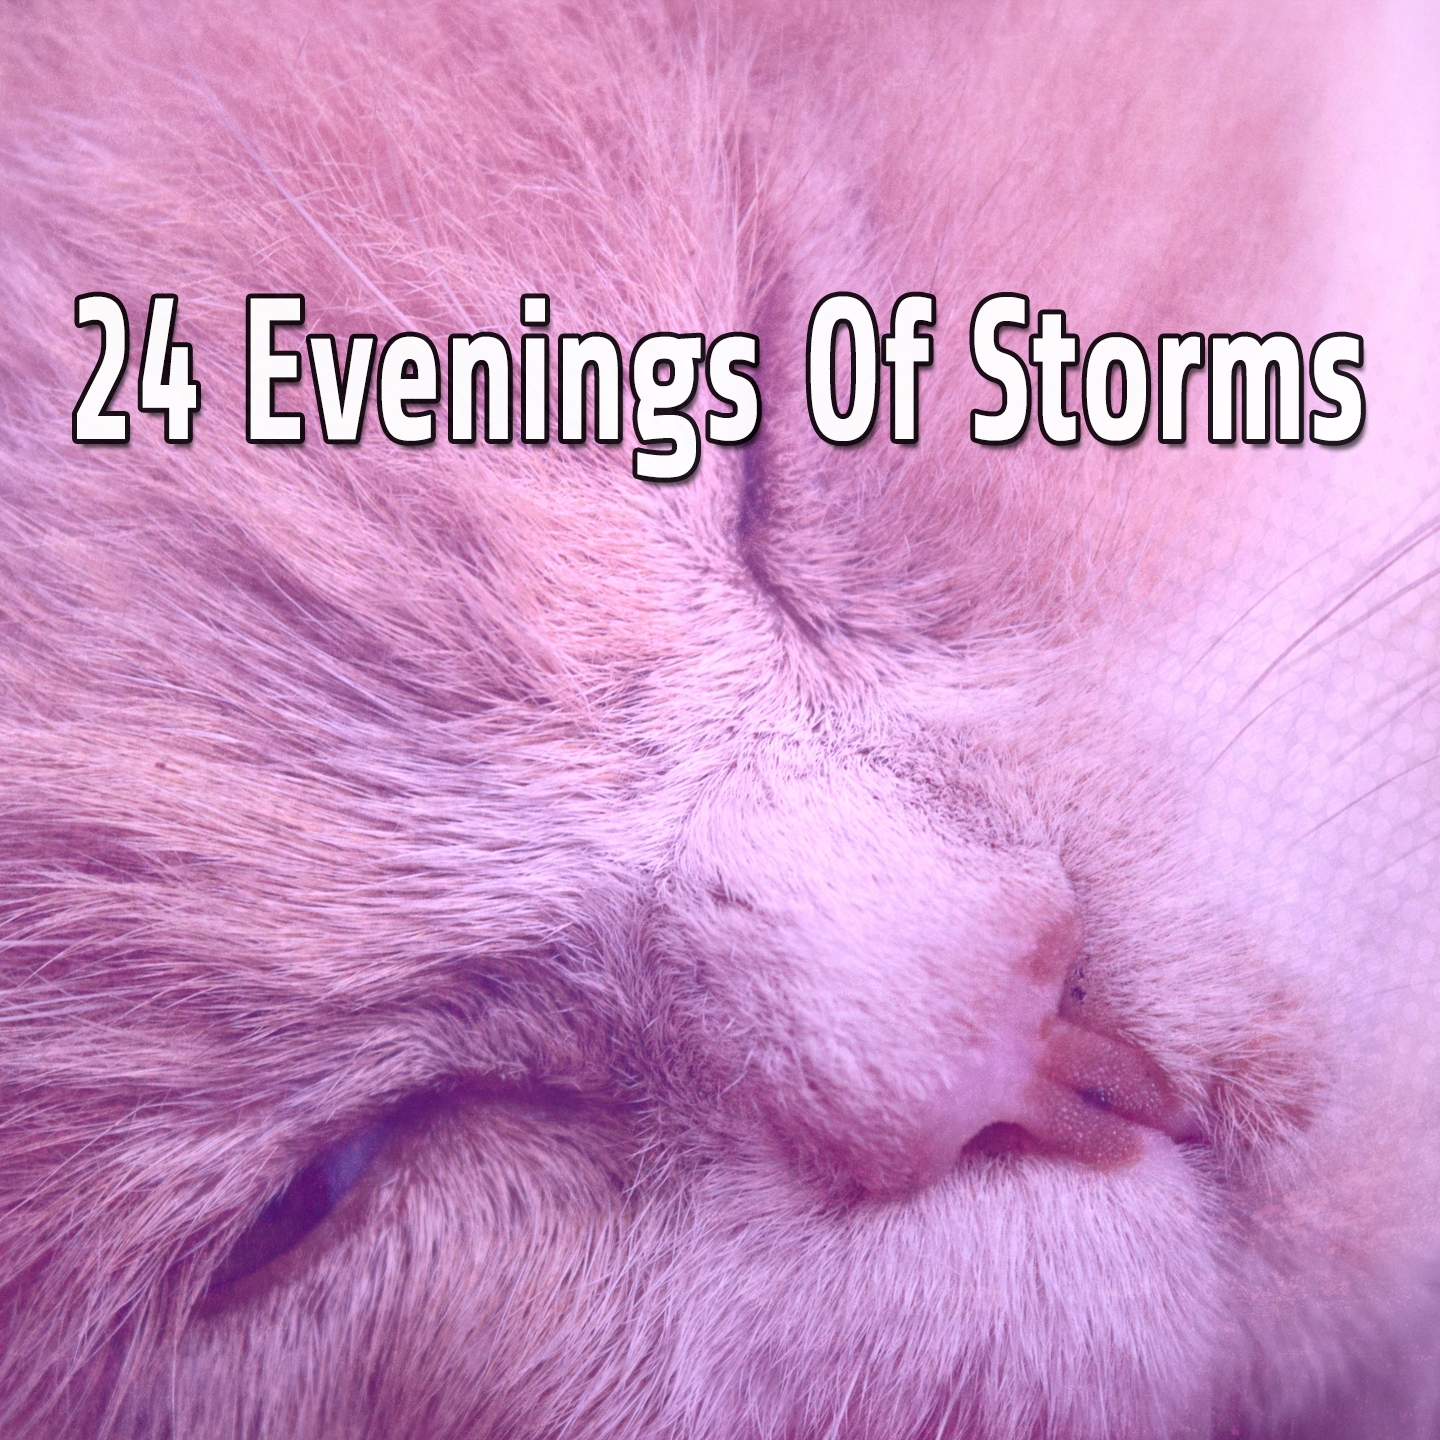 24 Evenings of Storms